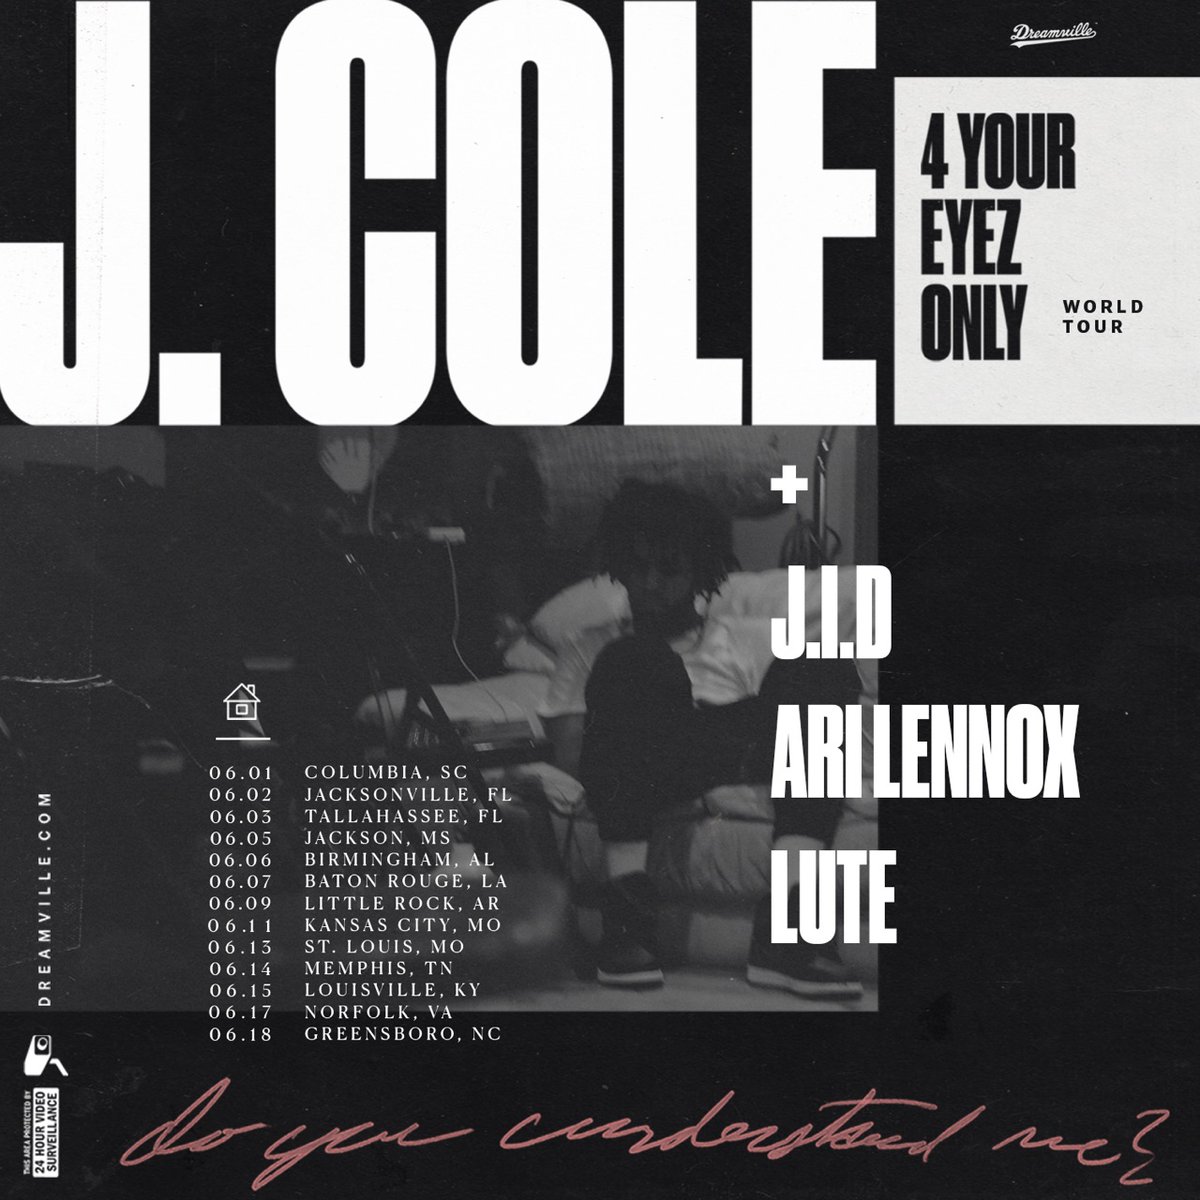 jcole 4 your eyez only tickets